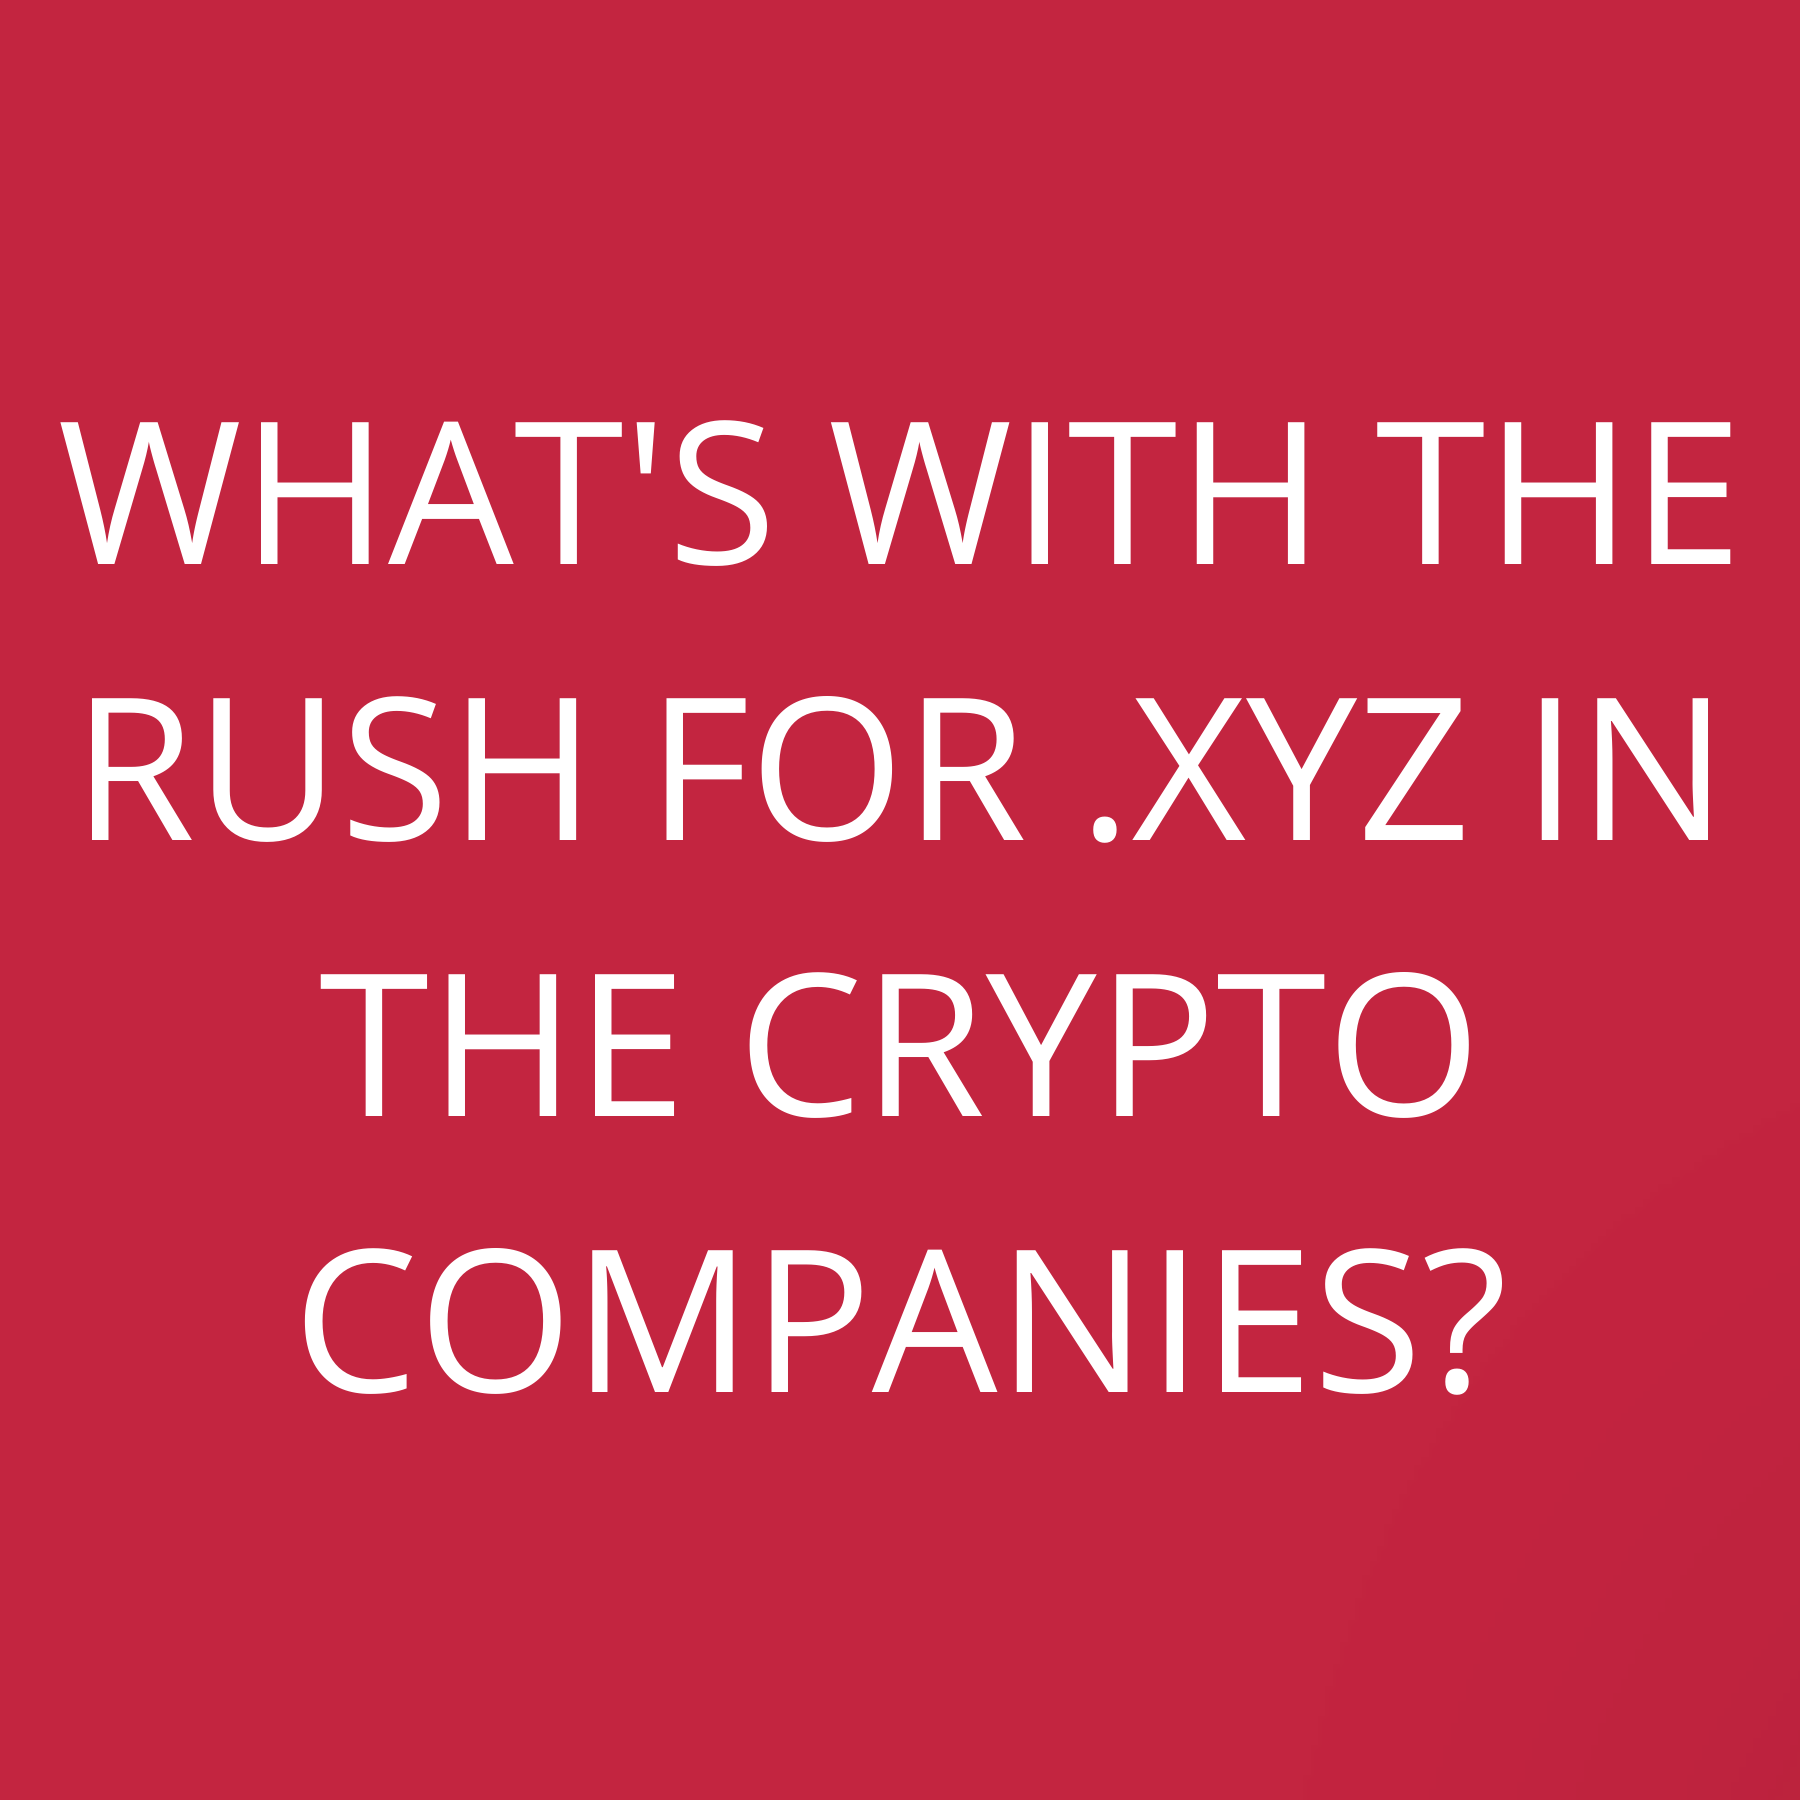 What’s with the rush for .xyz in the Crypto companies?